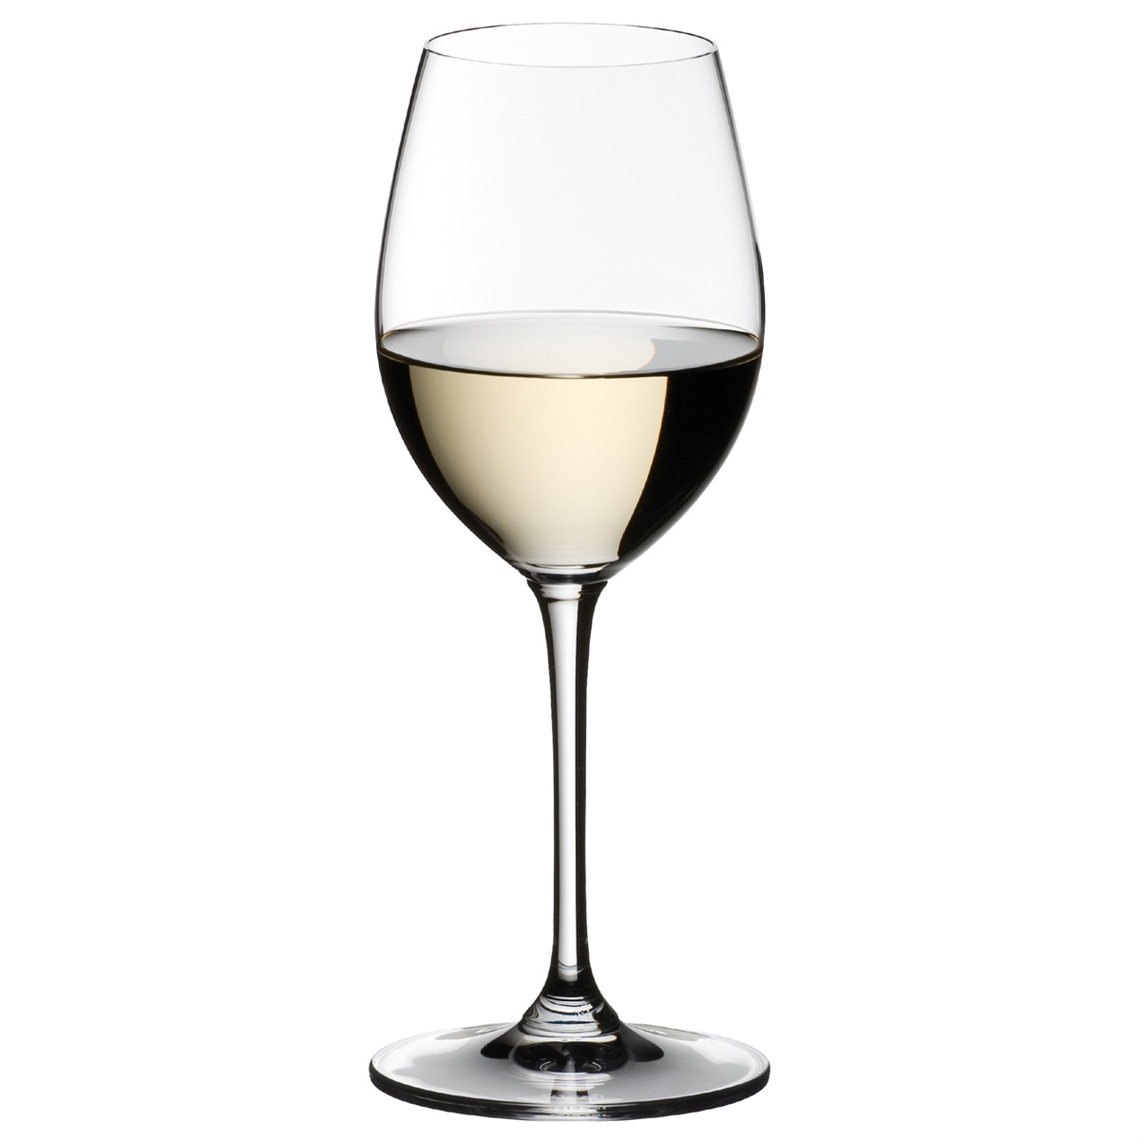 View more riedel extreme from our Dessert Wine Glasses range